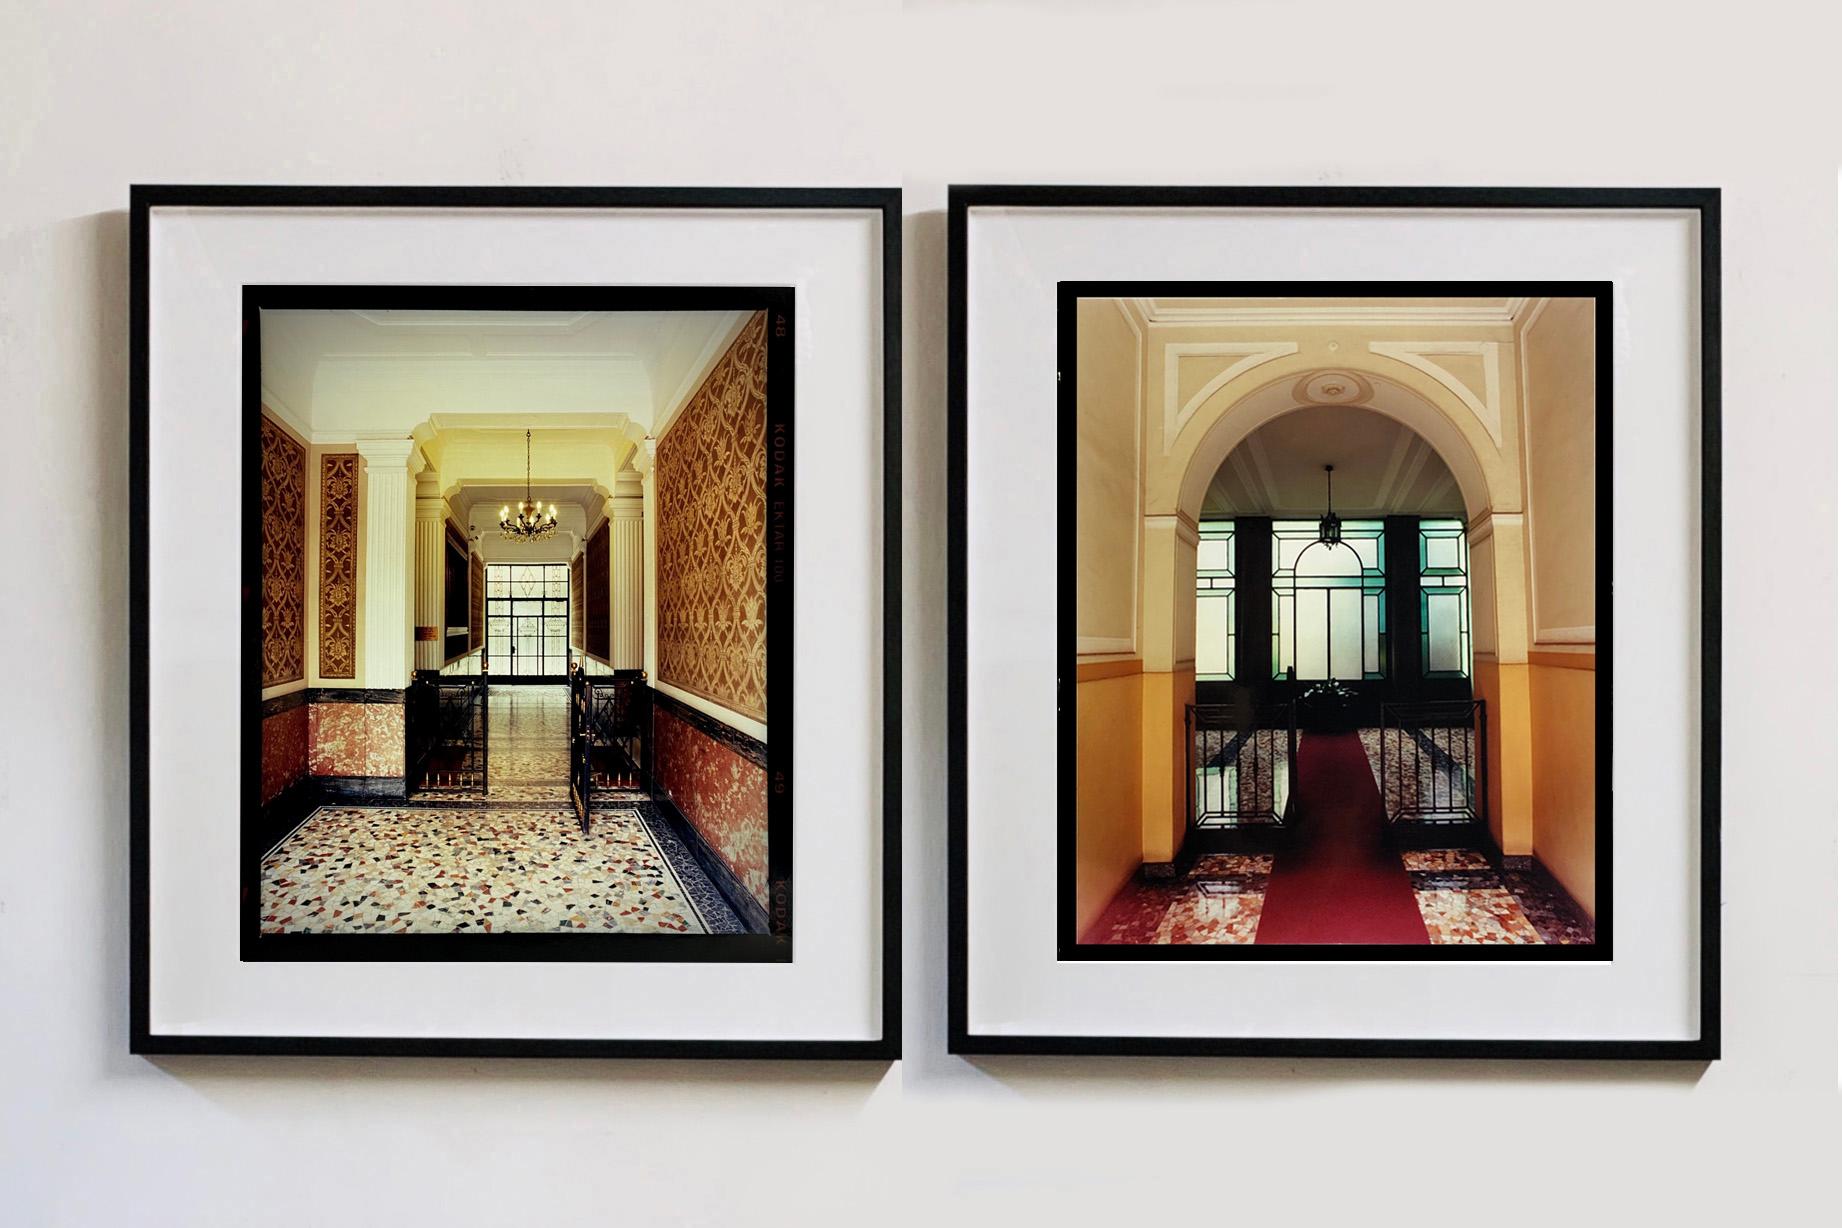 Foyer V, from Richard Heeps series A Short History of Milan which began as a special project for the 2018 Affordable Art Fair Milan. It was well received and the artwork has become popular with art buyers around the world. Richard continues to add